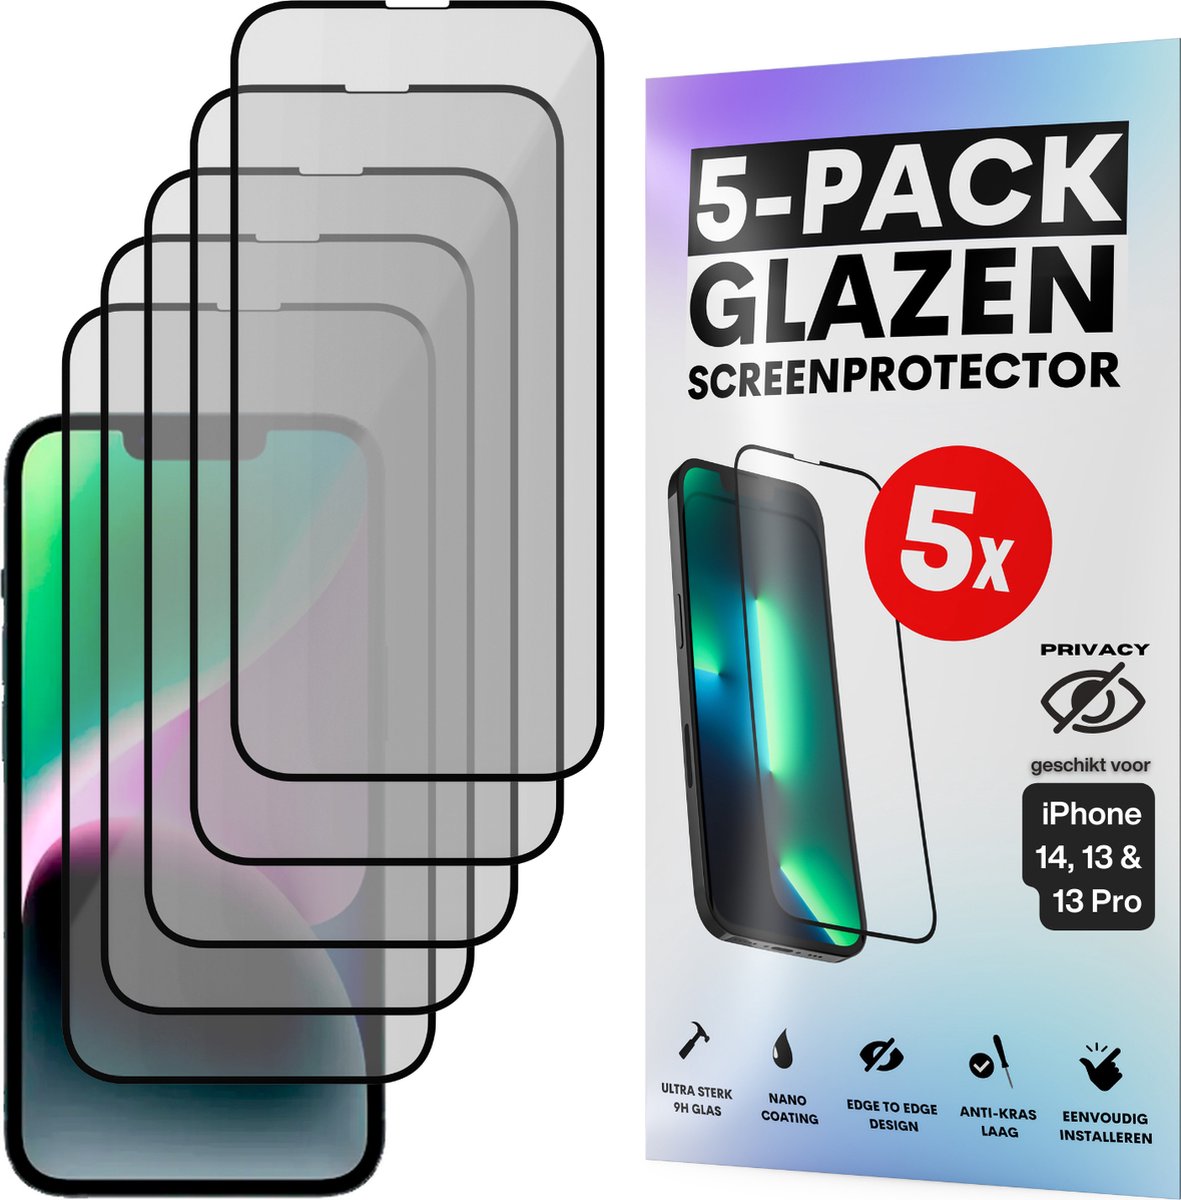 Privacy Screenprotector - Geschikt voor iPhone 14 / 13 / 13 Pro - Gehard Glas - Full Cover Tempered Privacy Glass - Case Friendly - 5 Pack